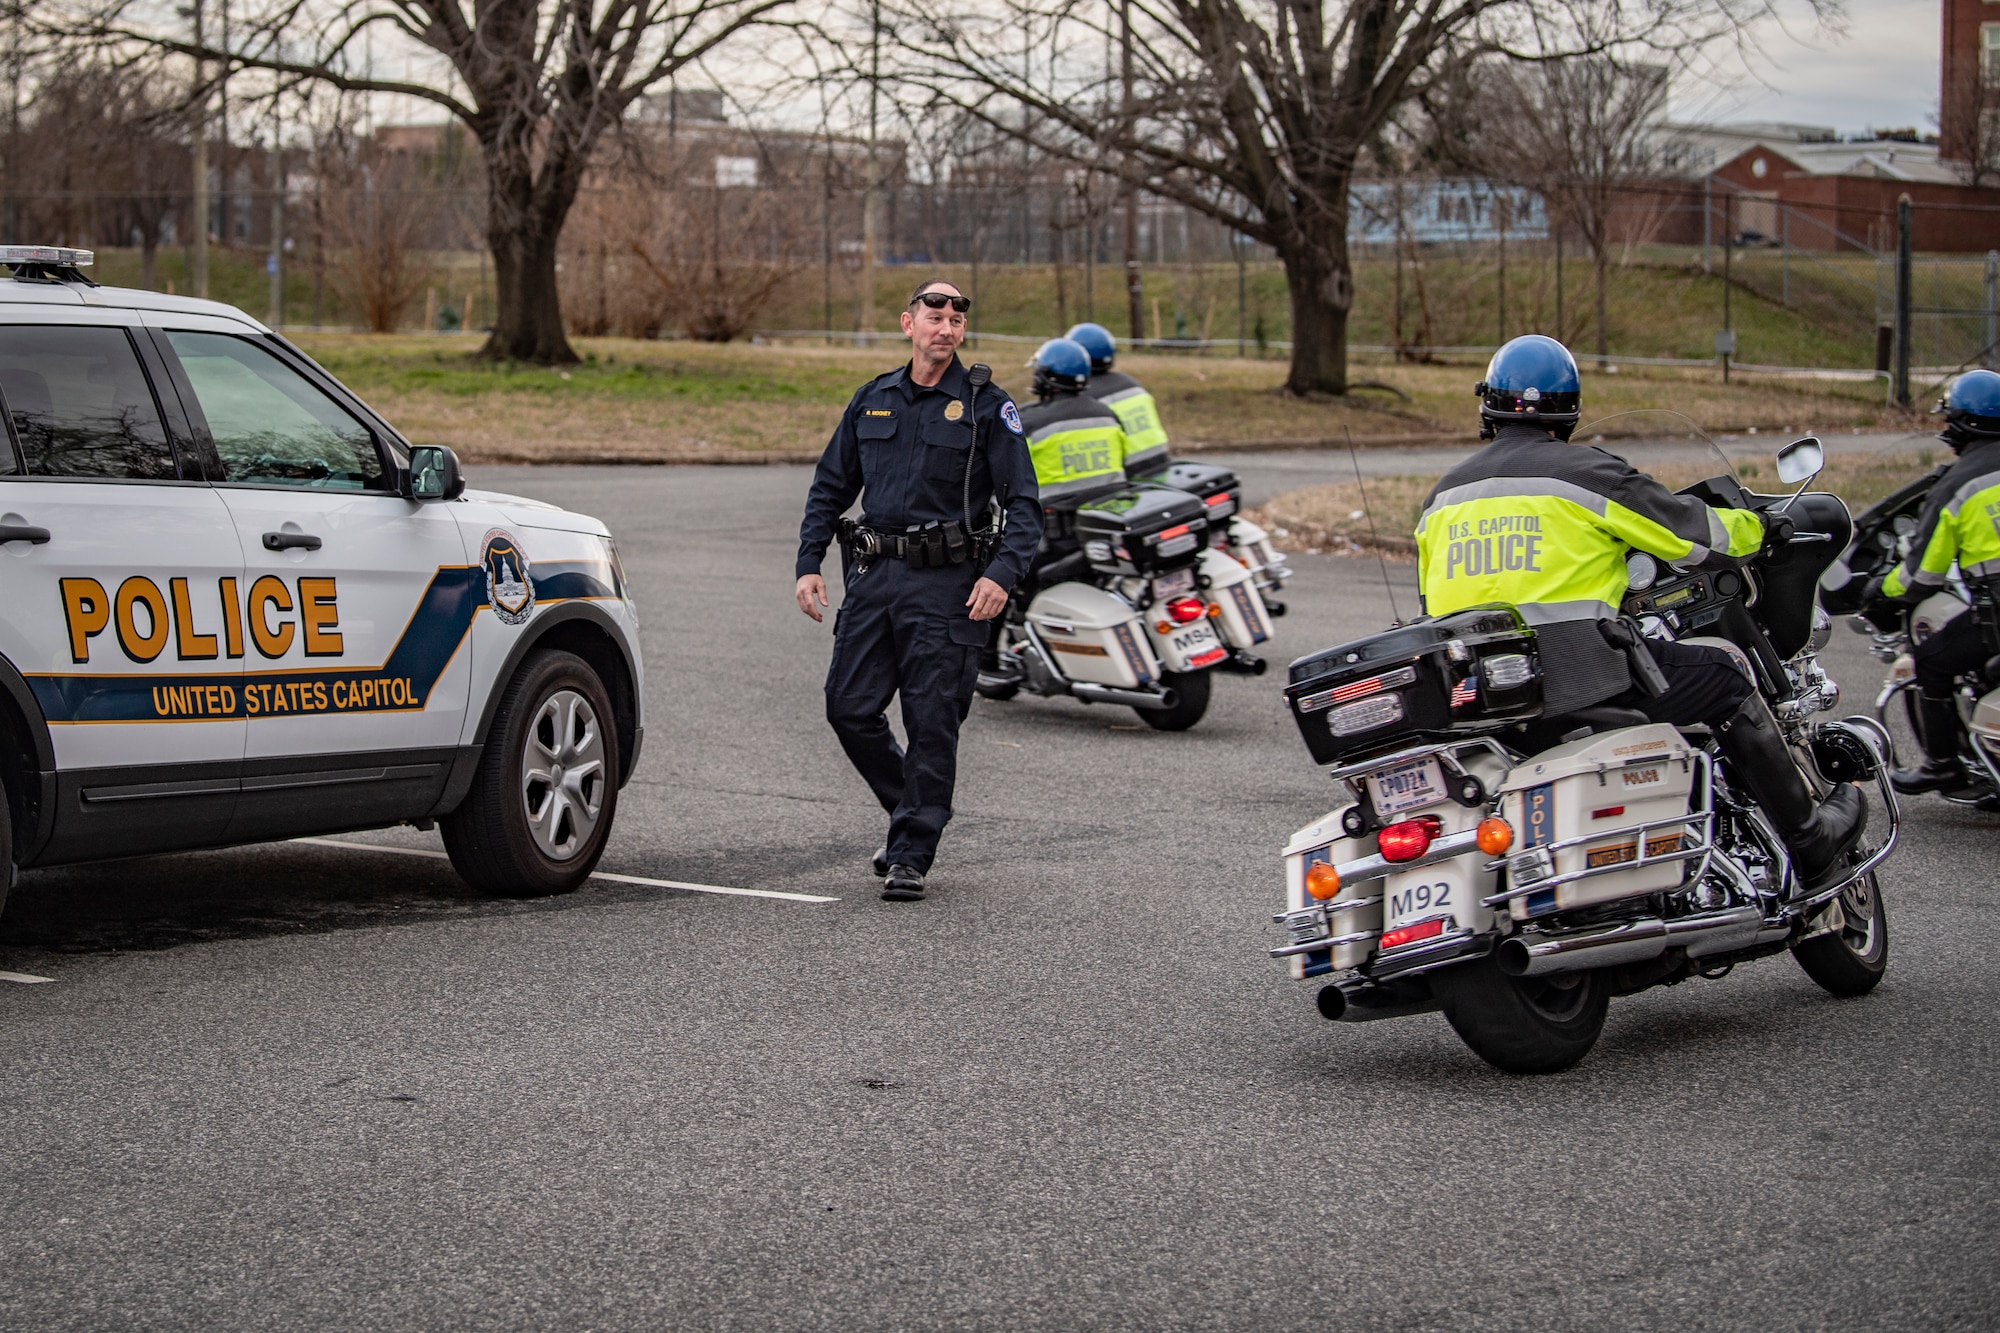 U.S. Captiol Police (USCP) Officer Ray Mooney directs the USCP to escort the West Virginia National Guard’s 35th Civil Support Team (CST) to depart for the U.S. Capitol prior to the 2020 State of the Union Address on Feb. 4, 2020 in Washington, D.C. The 35th CST was strategically prepositioned to provide support to and in conjunction with the D.C. Fire and Emergency Management Services, the USCP, the D.C. National Guard and many other civil and federal agencies for the SOTUA. (U.S. Air National Guard Photo by Staff Sgt. Caleb Vance)